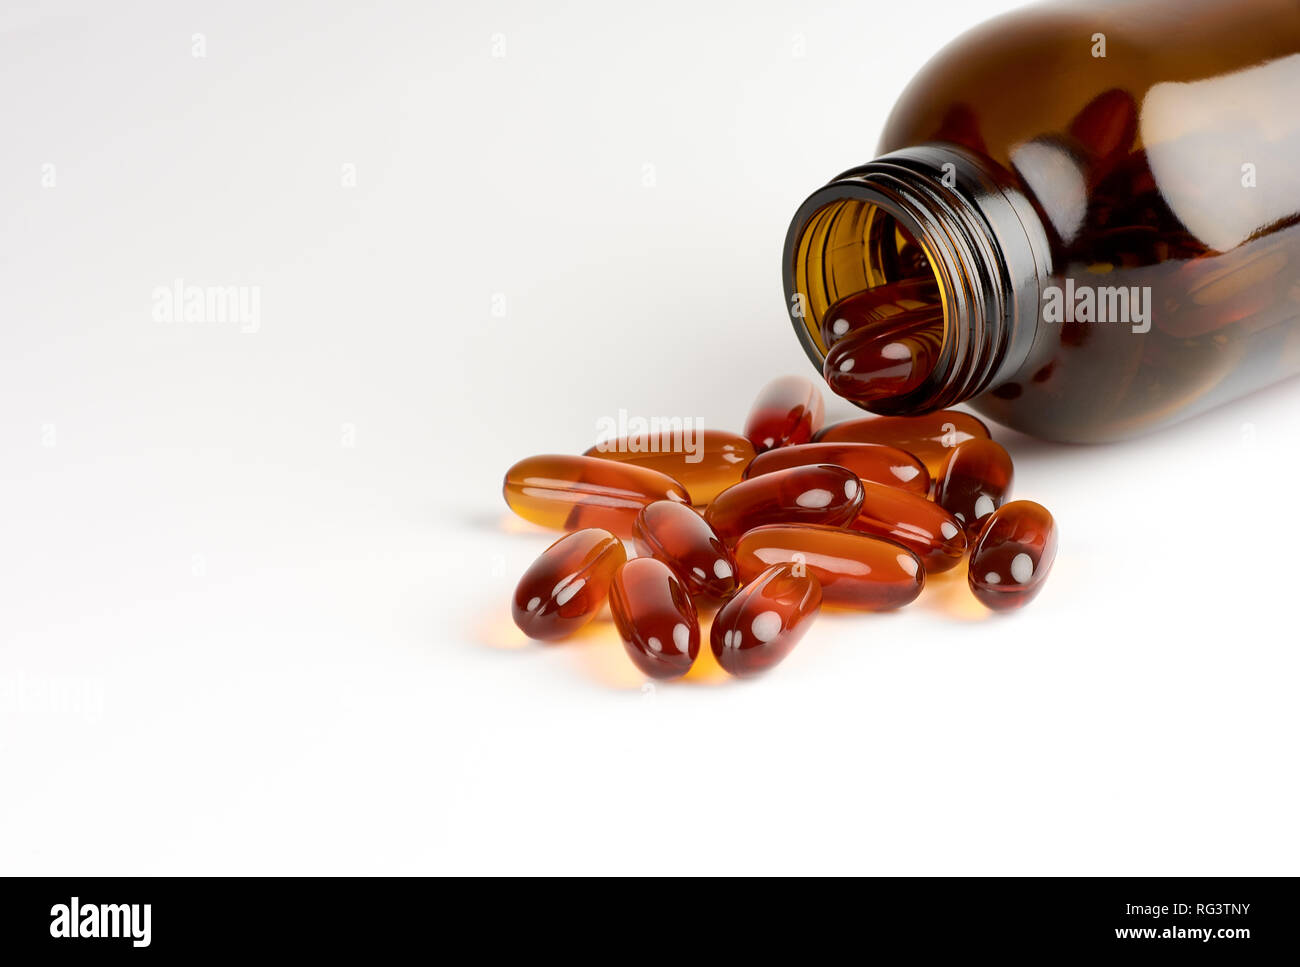 Close-up view of orange pills or lecithin capsules in a brown glass bottle on a white background with space for text Stock Photo